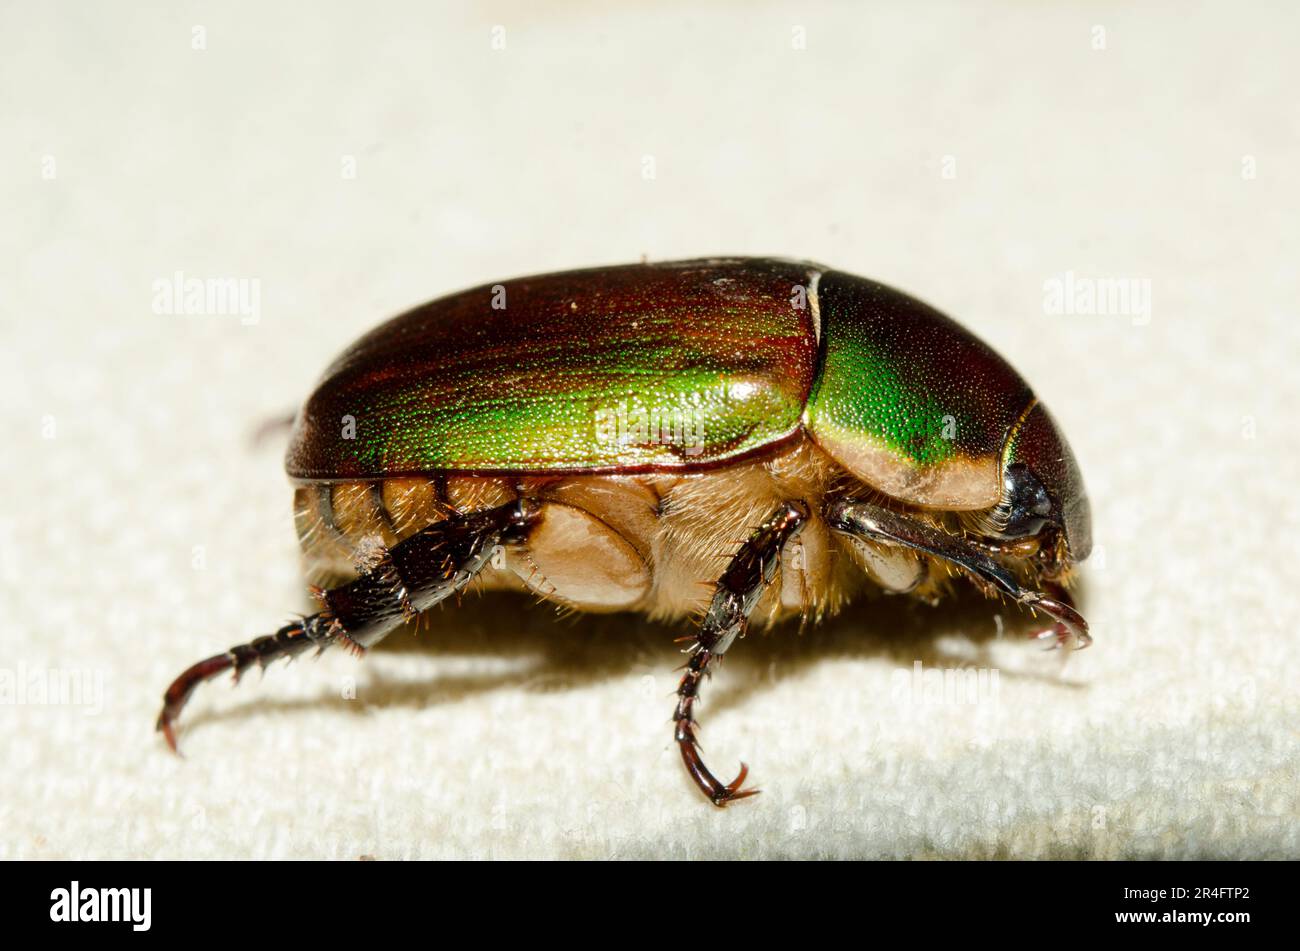 Shining Leaf Chafer, Anomala sp, Klungkung, Bali, Indonesia Stock Photo